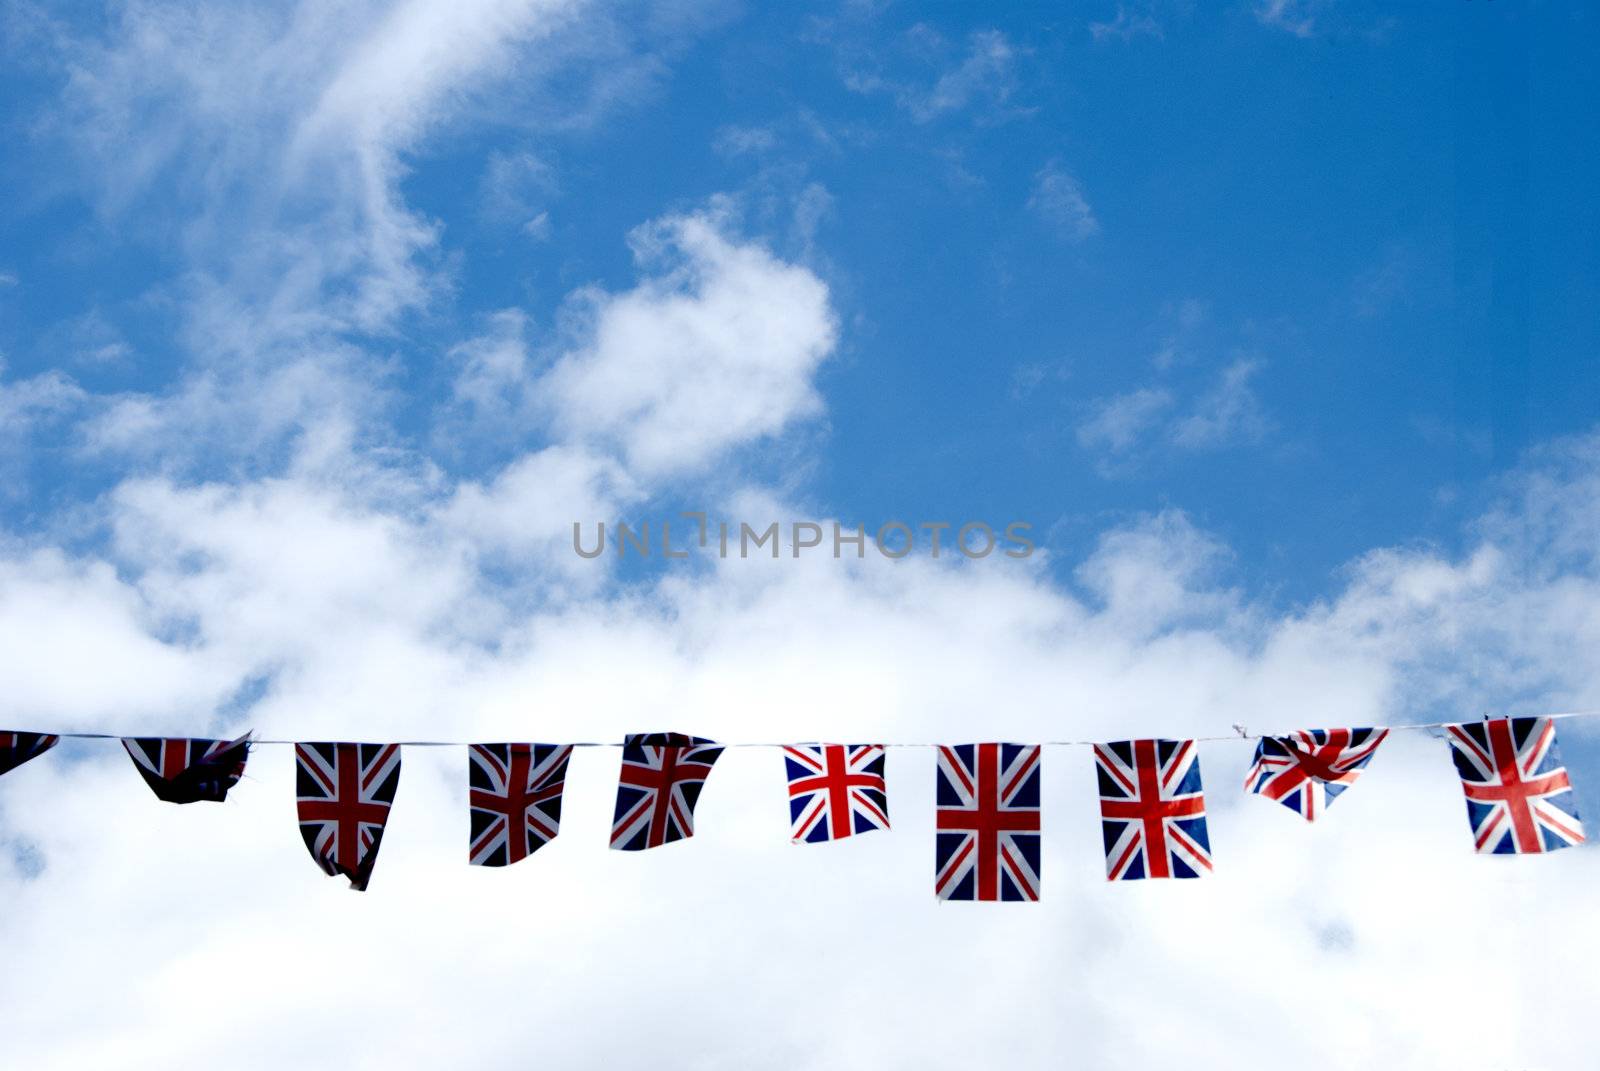 A String of Union Jack Flags across the main street in Haworth Yorkshire